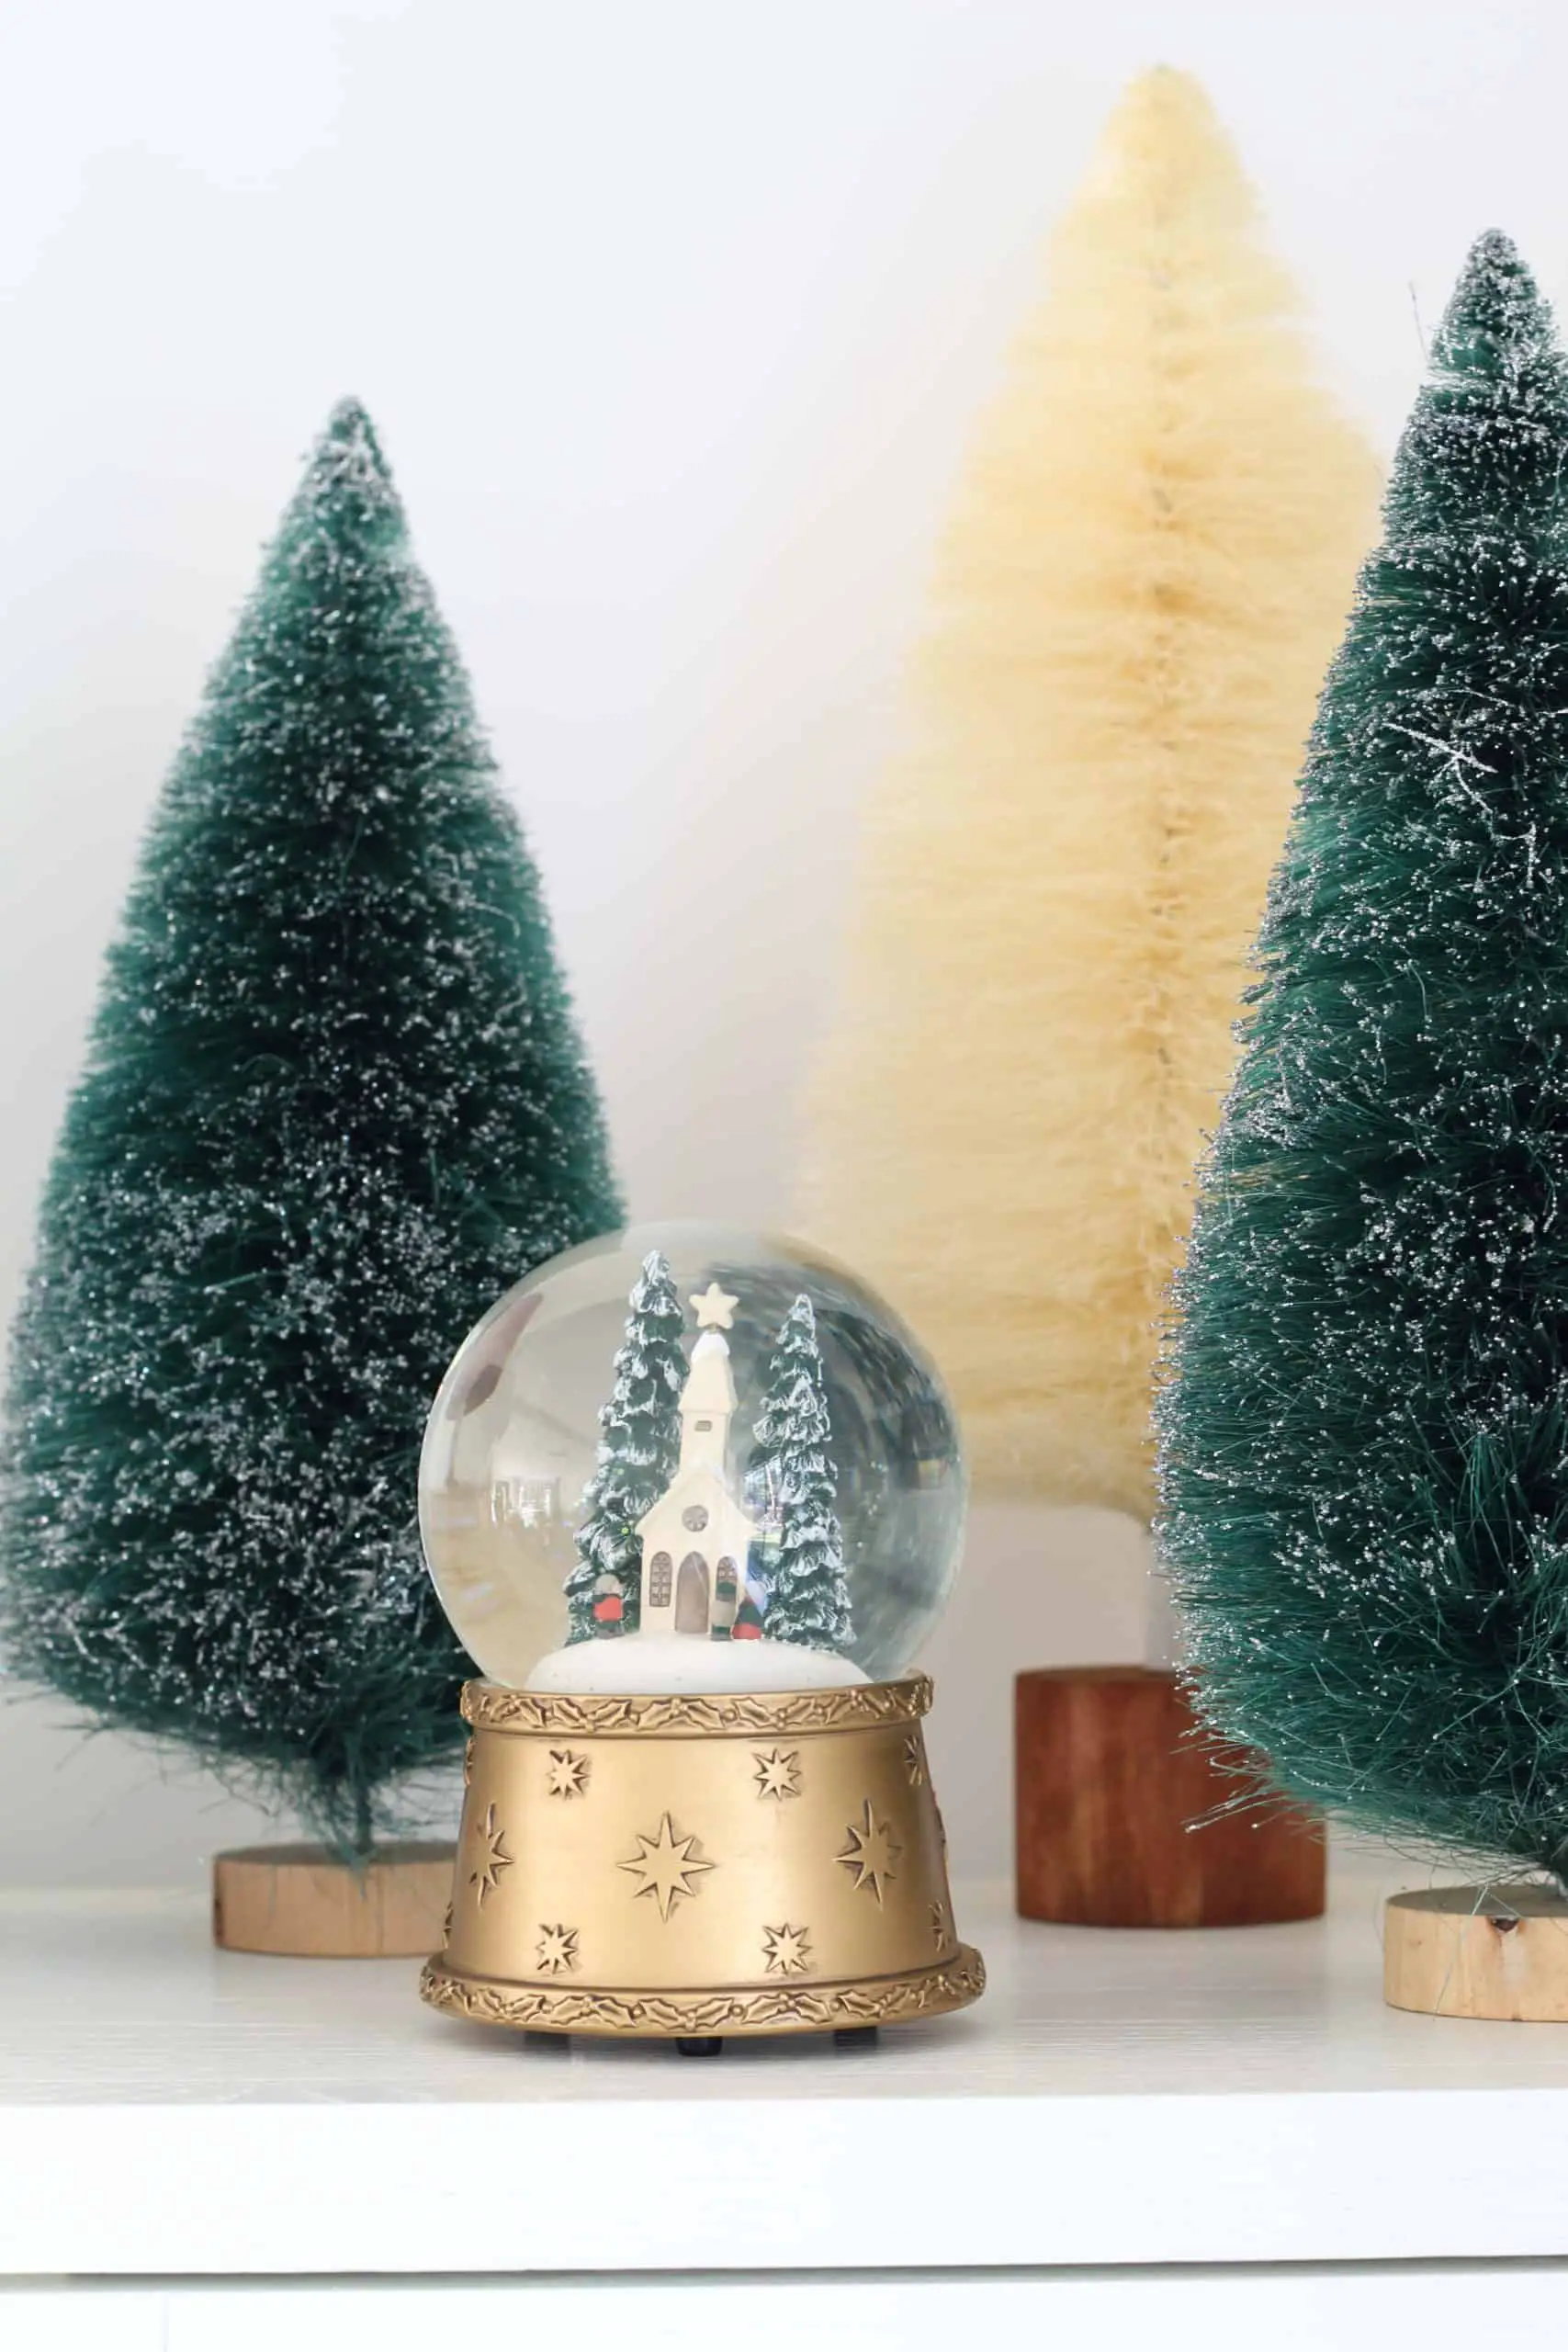 bottle brush trees and snow globe with church in it